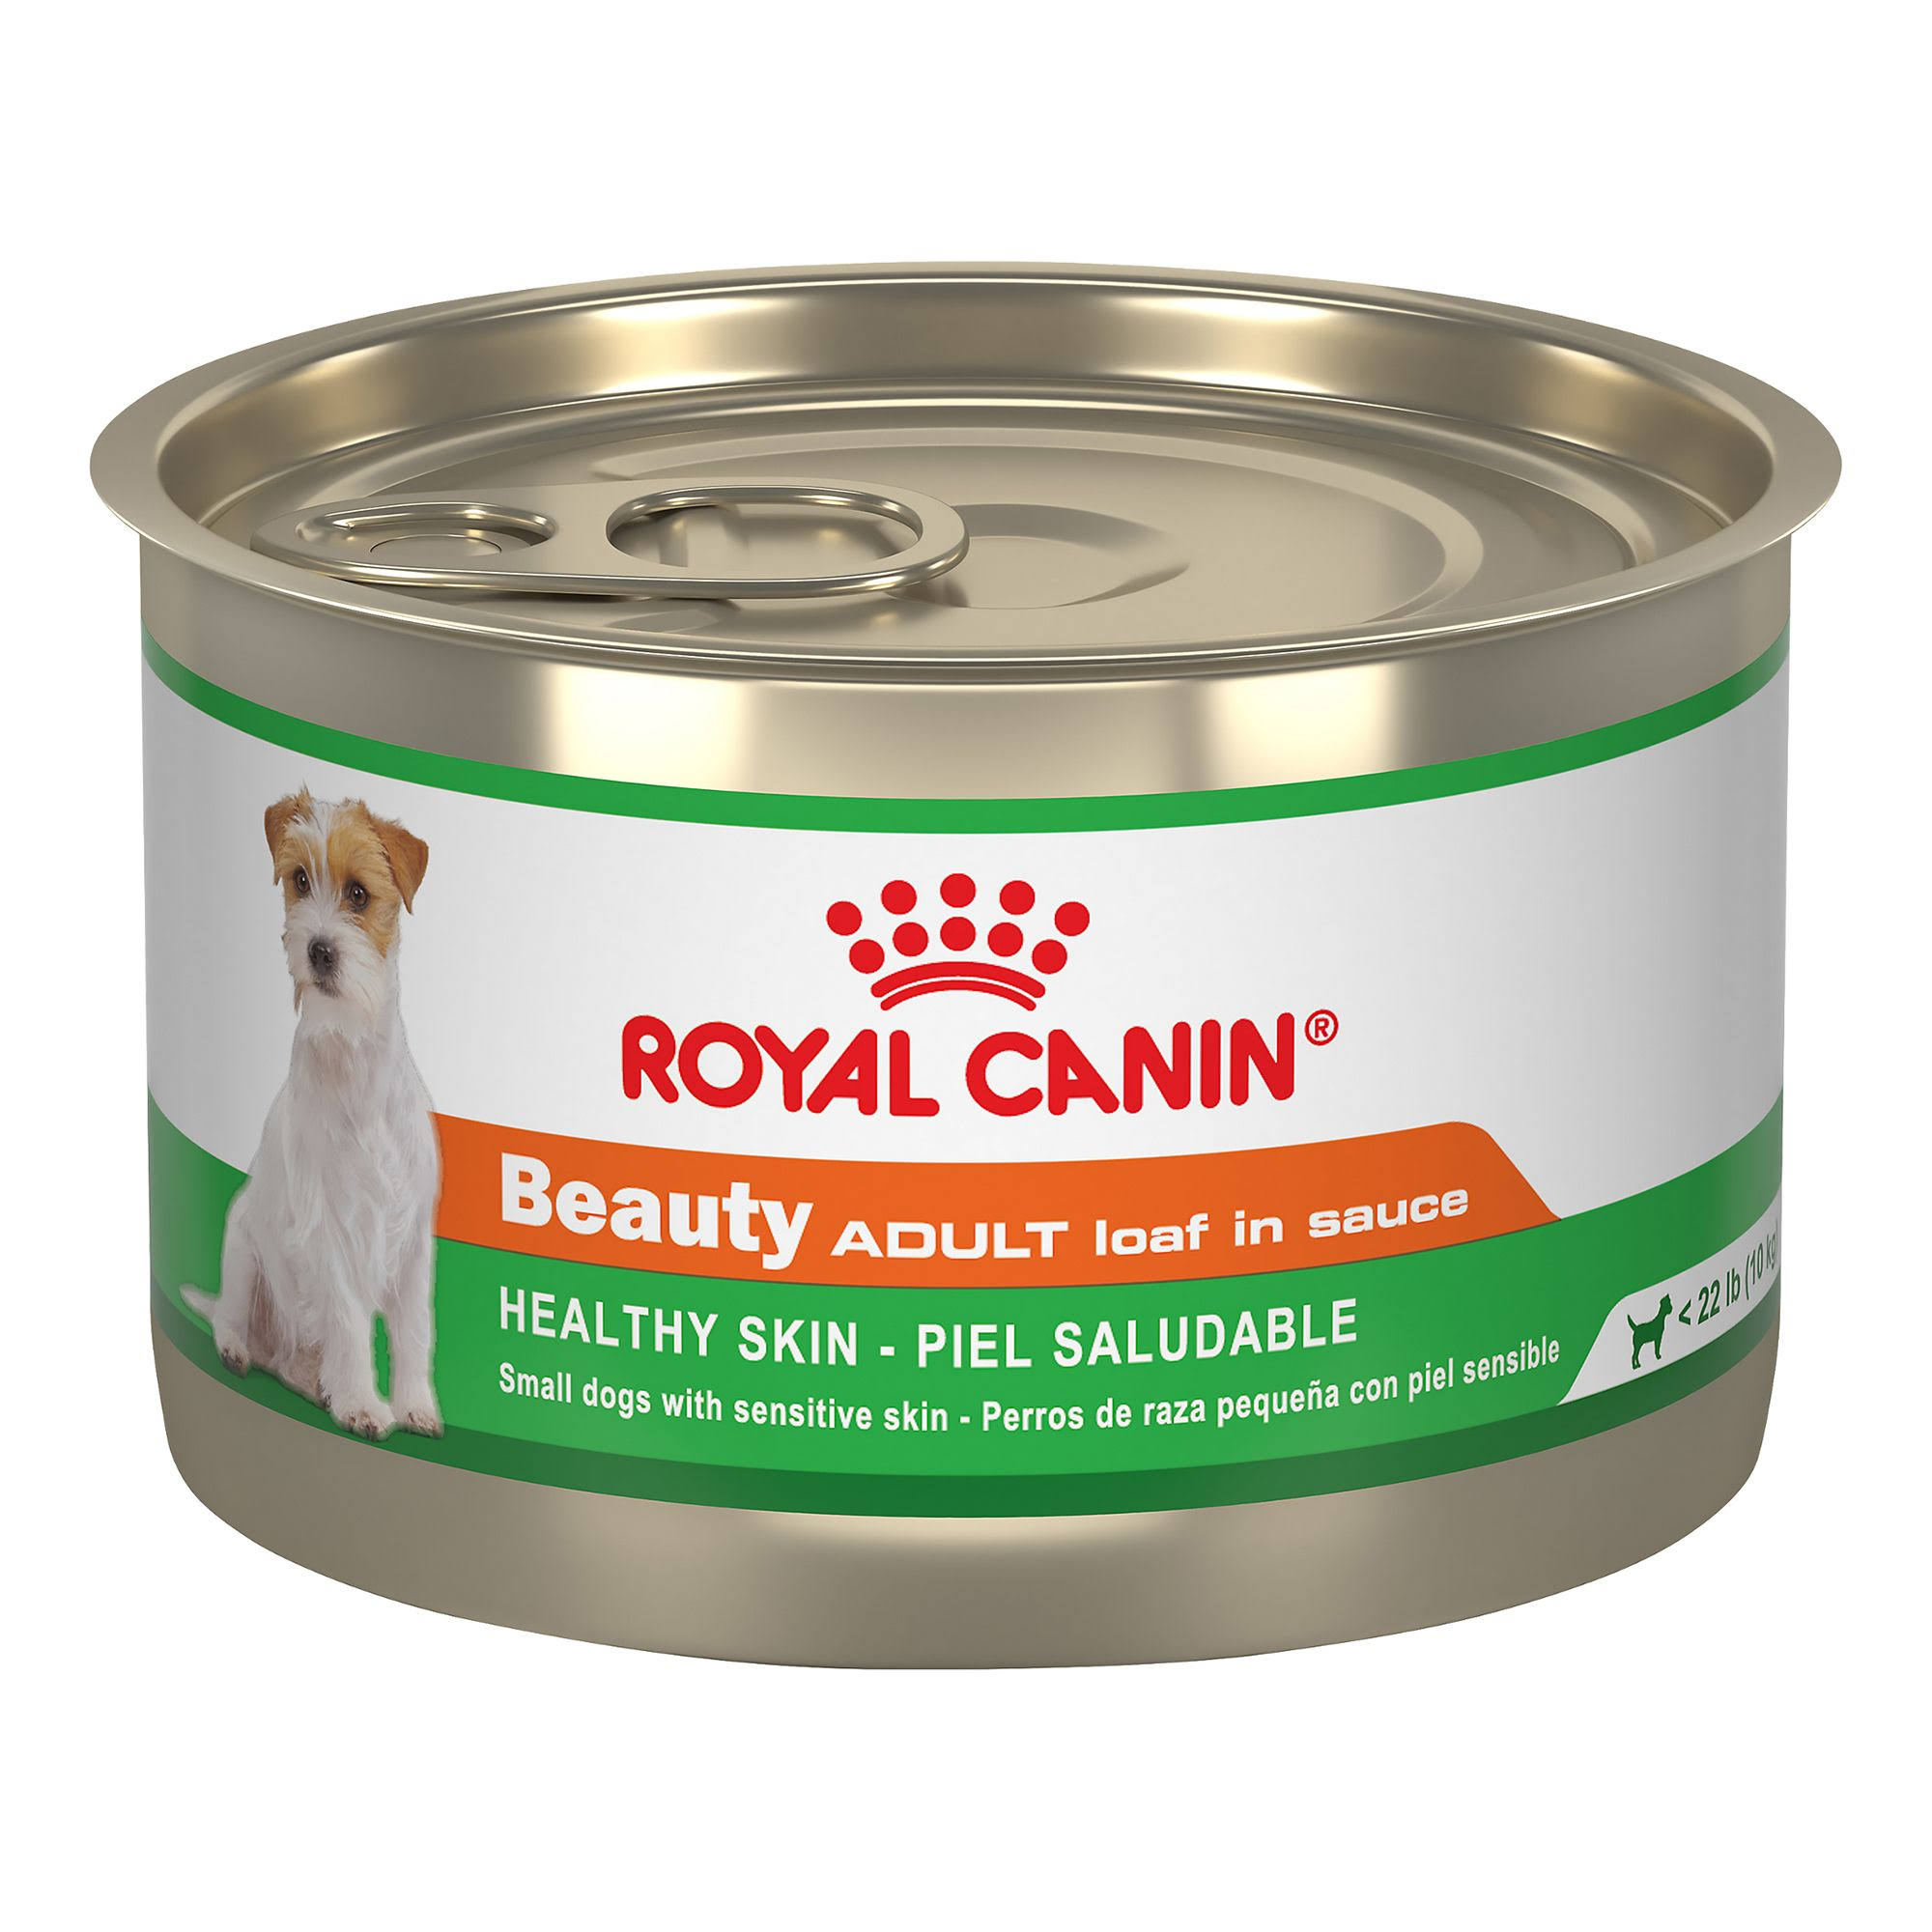 Royal Canin Adult Beauty Loaf in Sauce Canned Dog Food, 5.2 oz